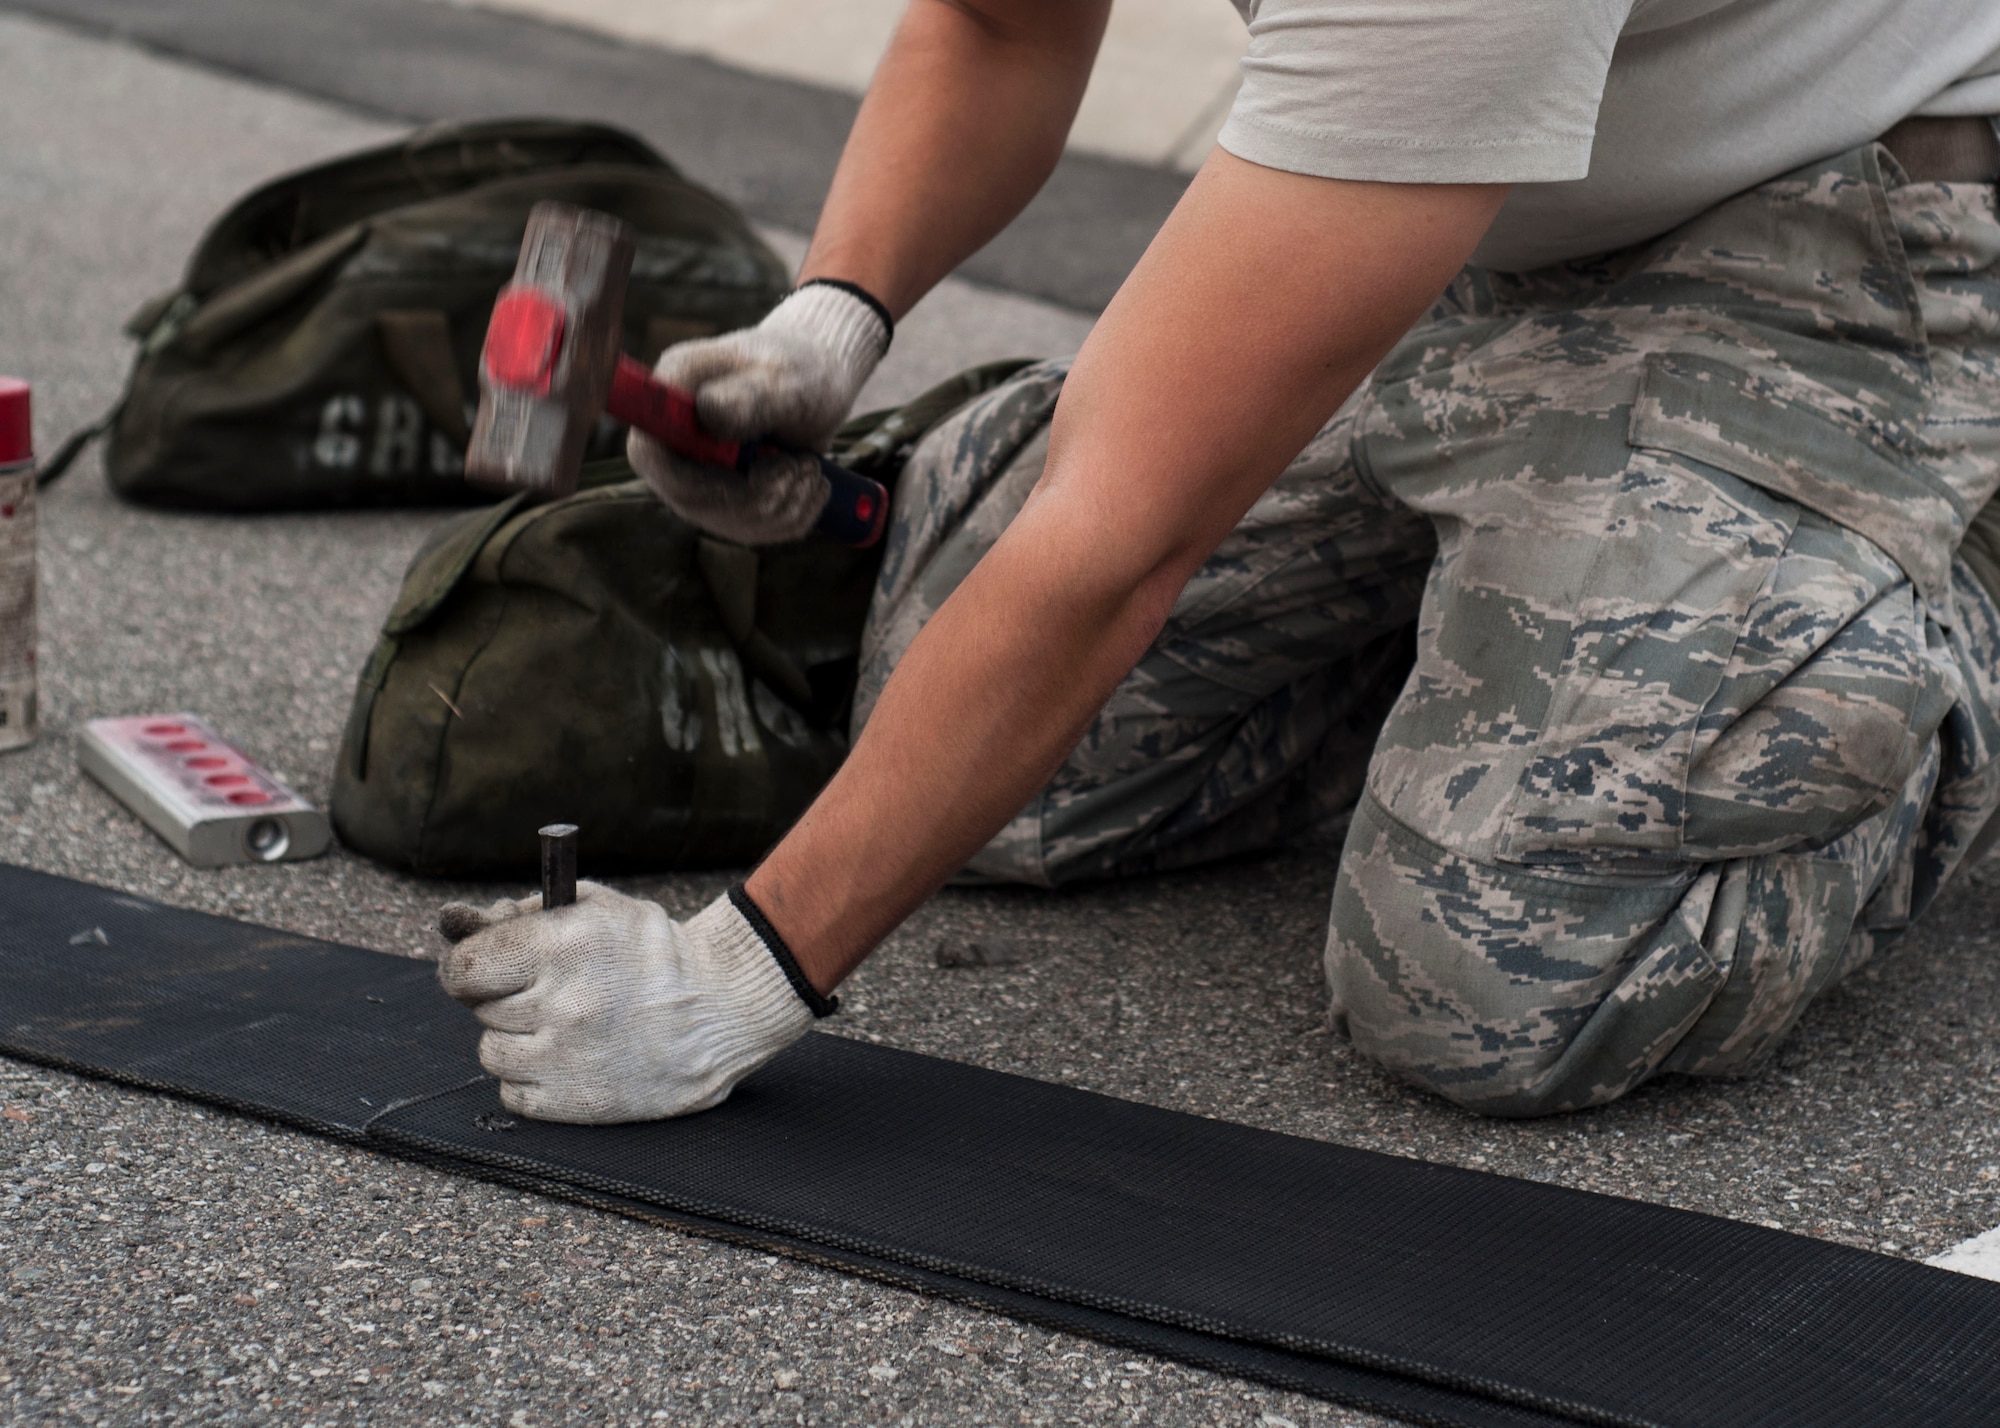 U.S. Air Force Senior Airmen Daniel Tomasek, 8th Civil Engineer Squadron electrical power production journeyman, uses a hammer to pierce holes in the nylon tape used for the aircraft arresting system at Kunsan Air Base, Republic of Korea, Sept. 9, 2017. The holes allow for the attachment of a connector that hooks to a steel cable strung across the flight line. The system, which is designed to bring out-of-control aircraft to a safe stop, can withstand a tension of approximately 170 pounds per square inch. (U.S. Air Force photo by Staff Sgt. Victoria H. Taylor)